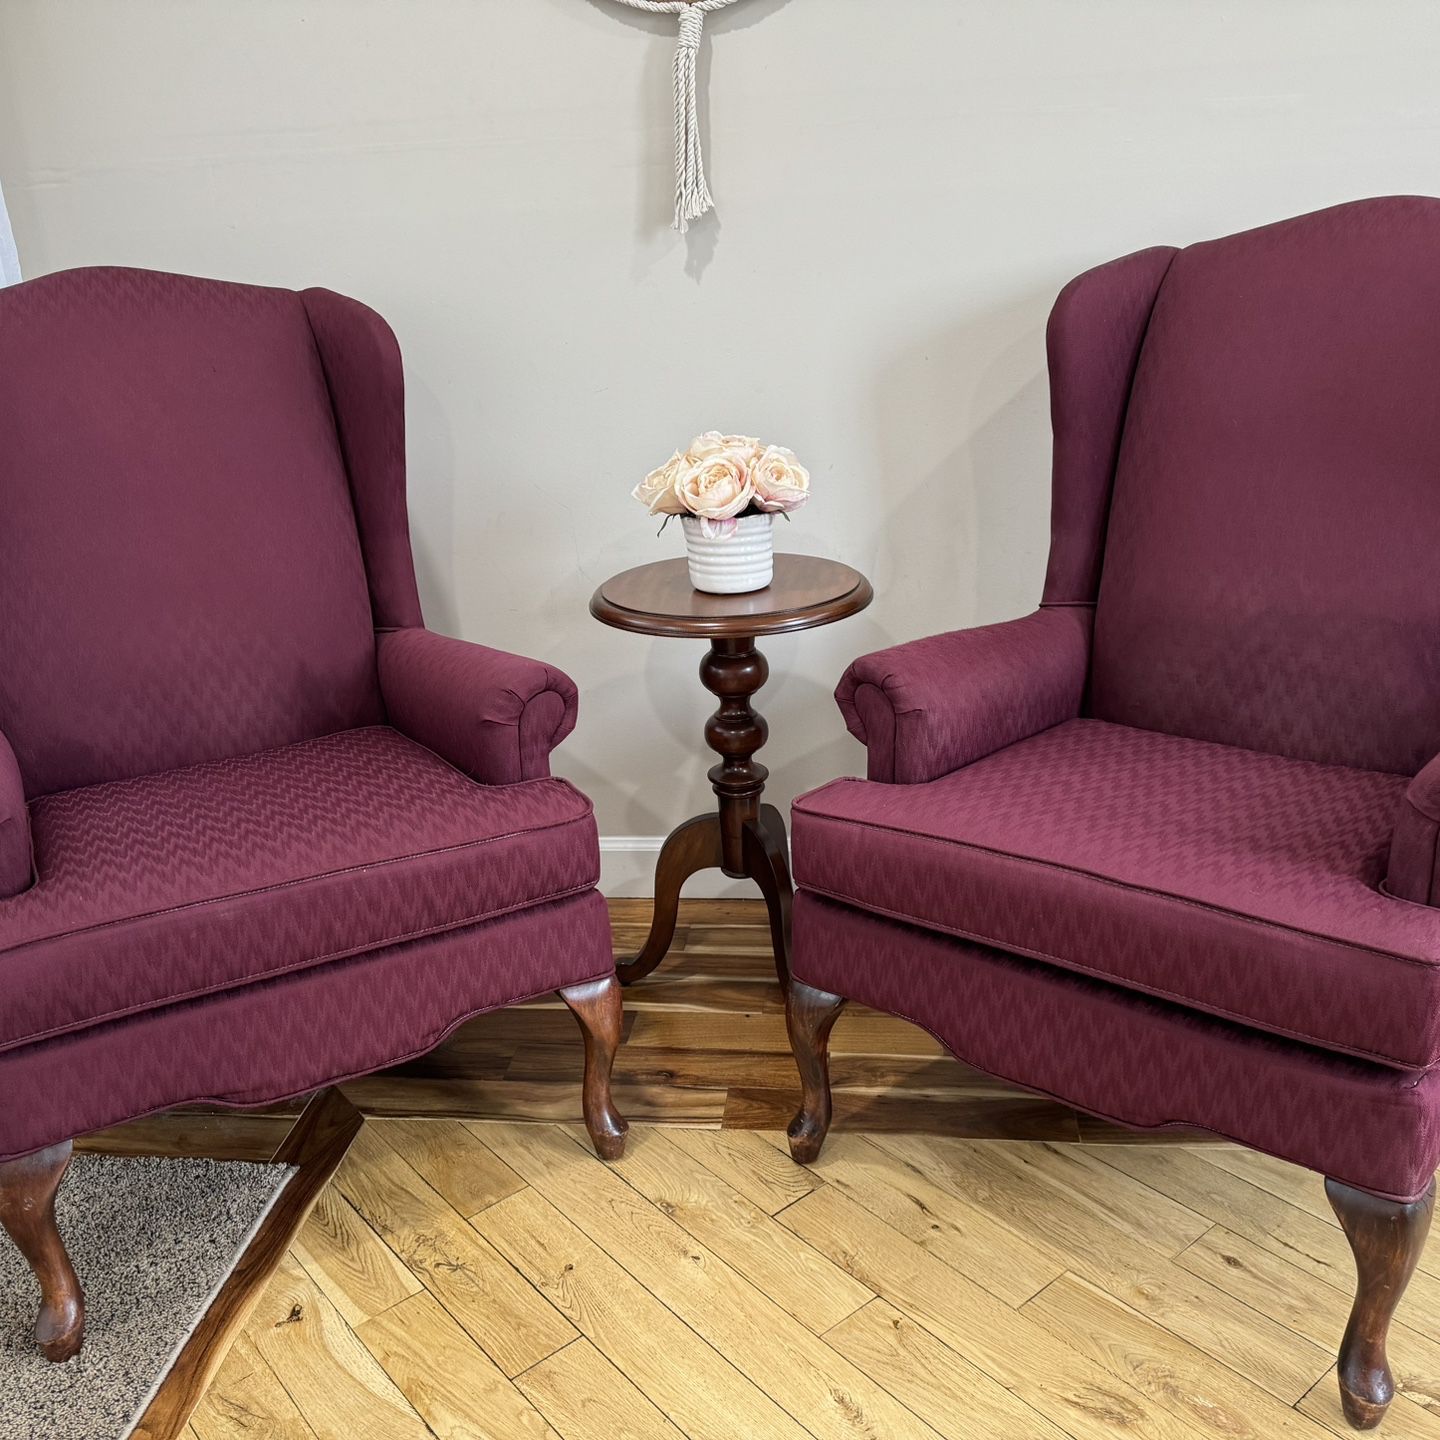 2 Wing Chairs -$75.00 Each 